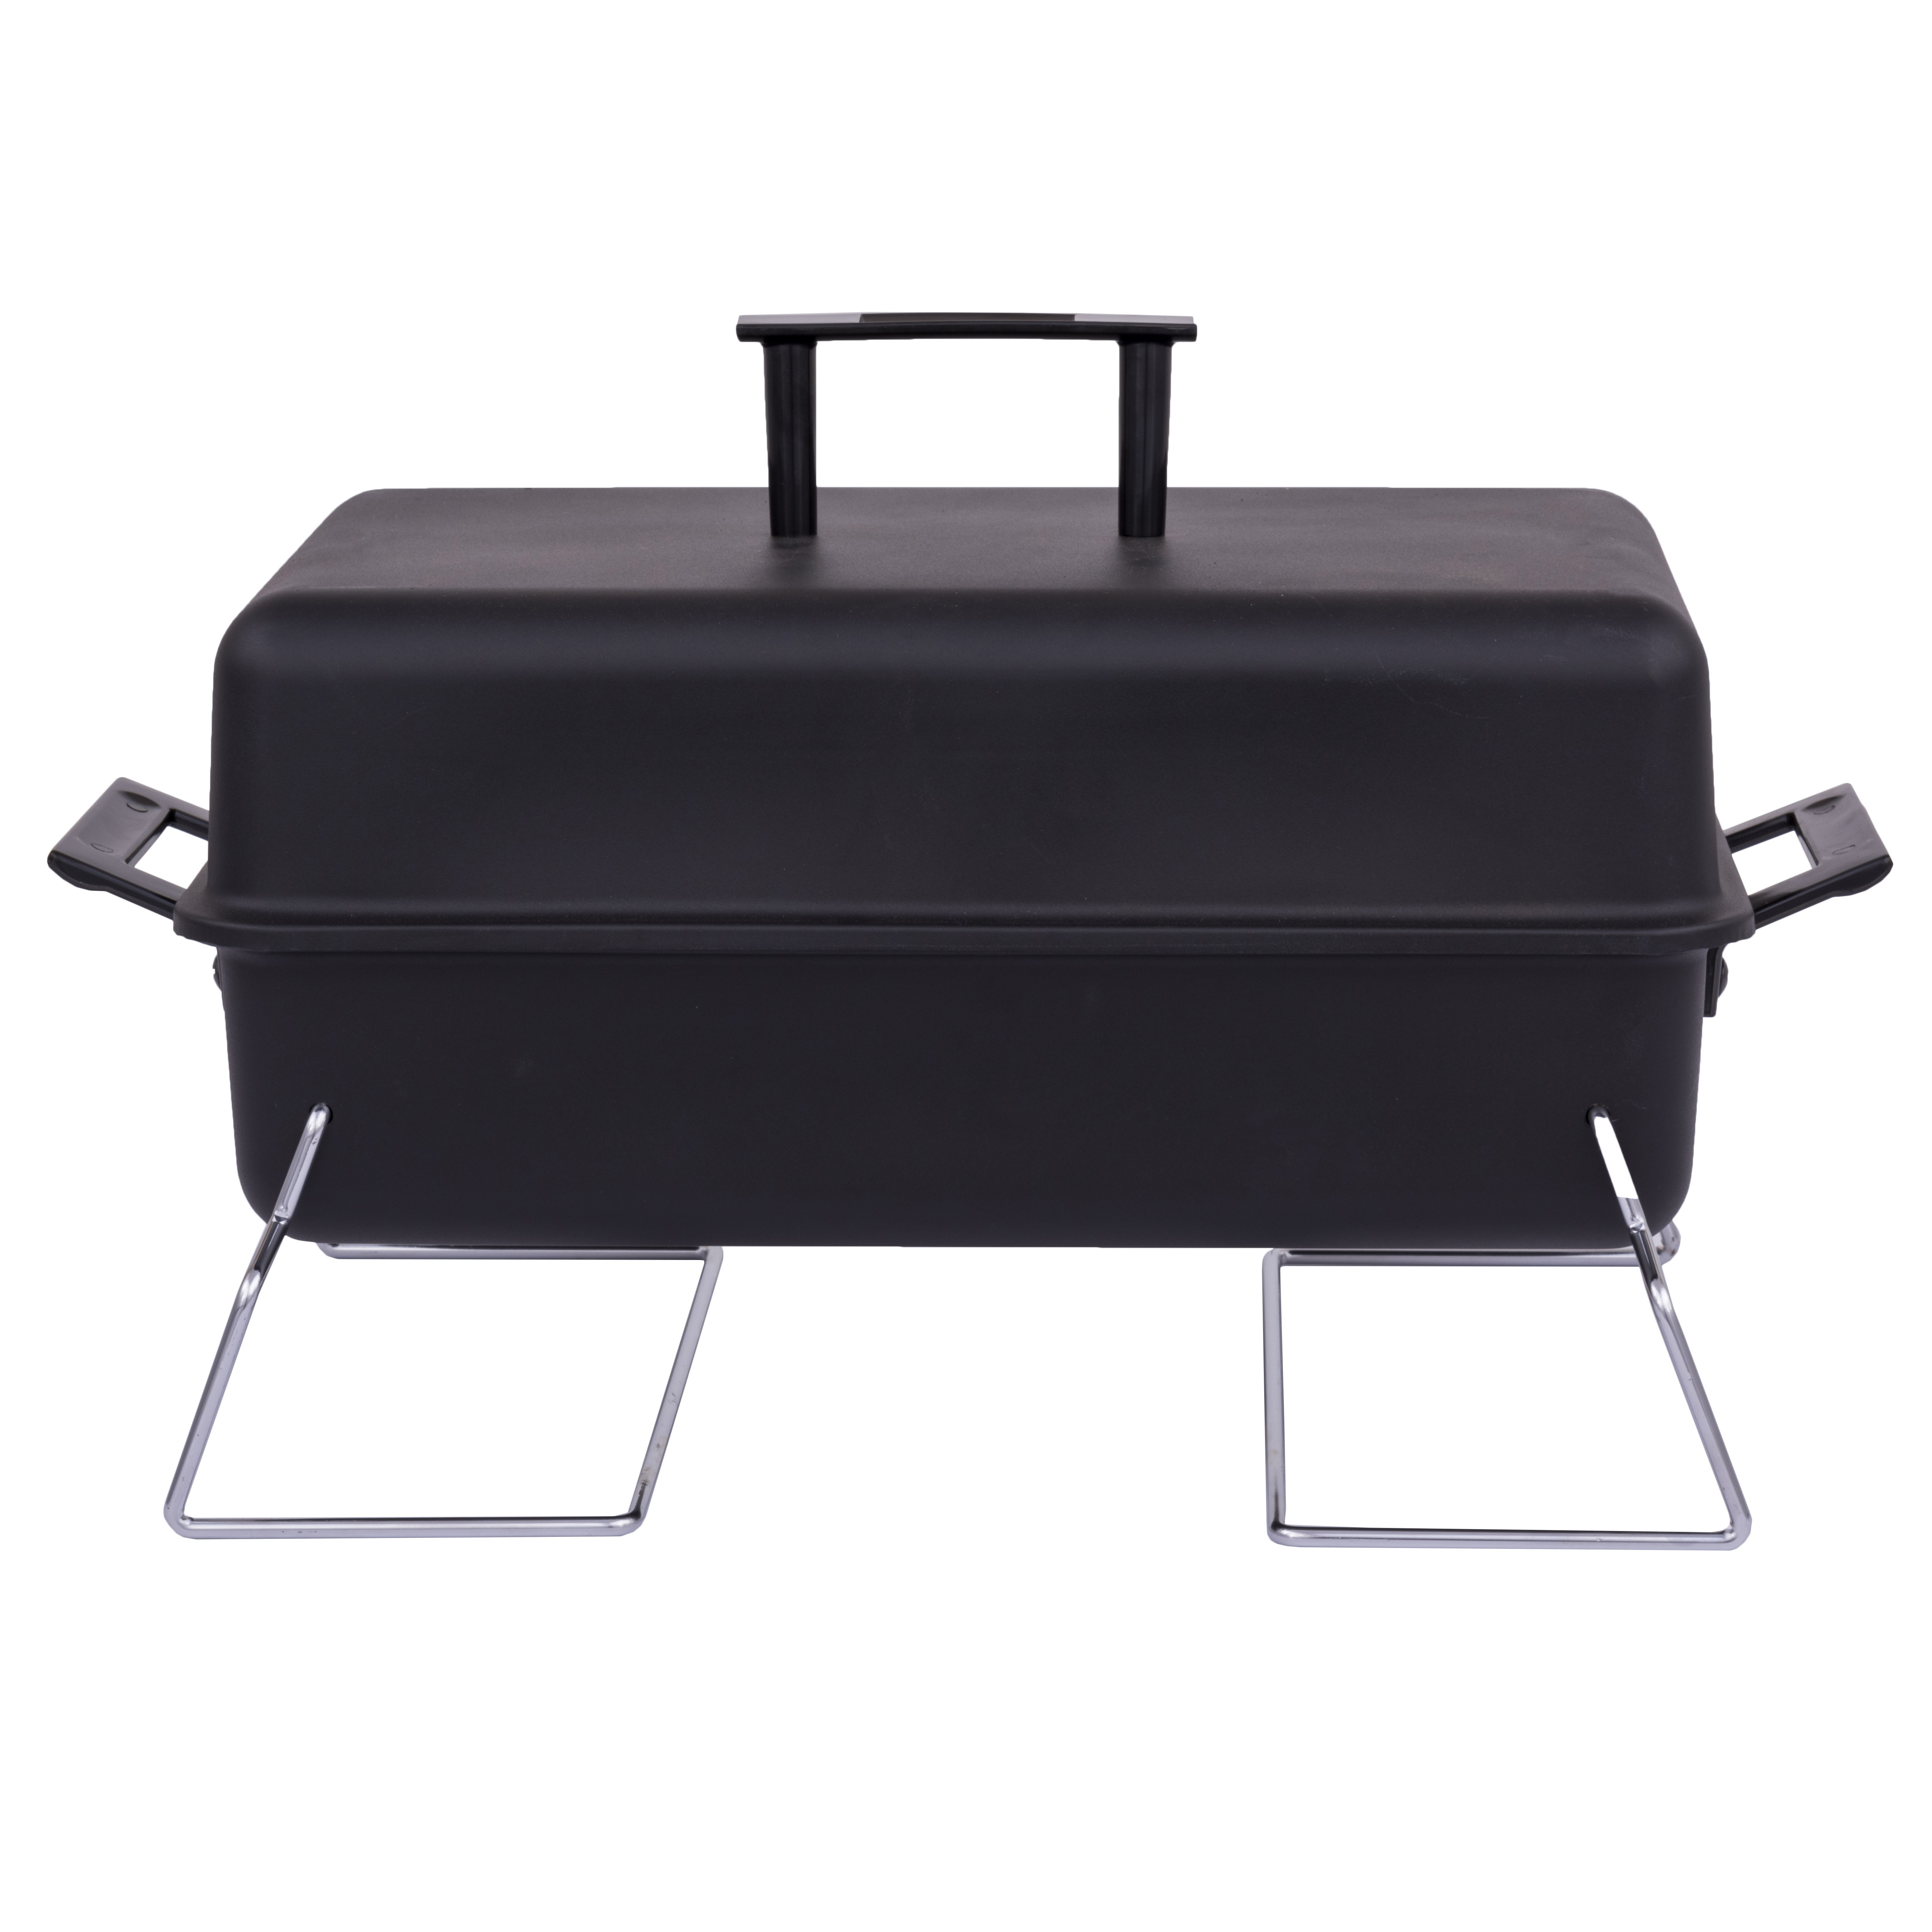 Char-Broil 190 Portable Tabletop Charcoal Grill- Black - image 1 of 8